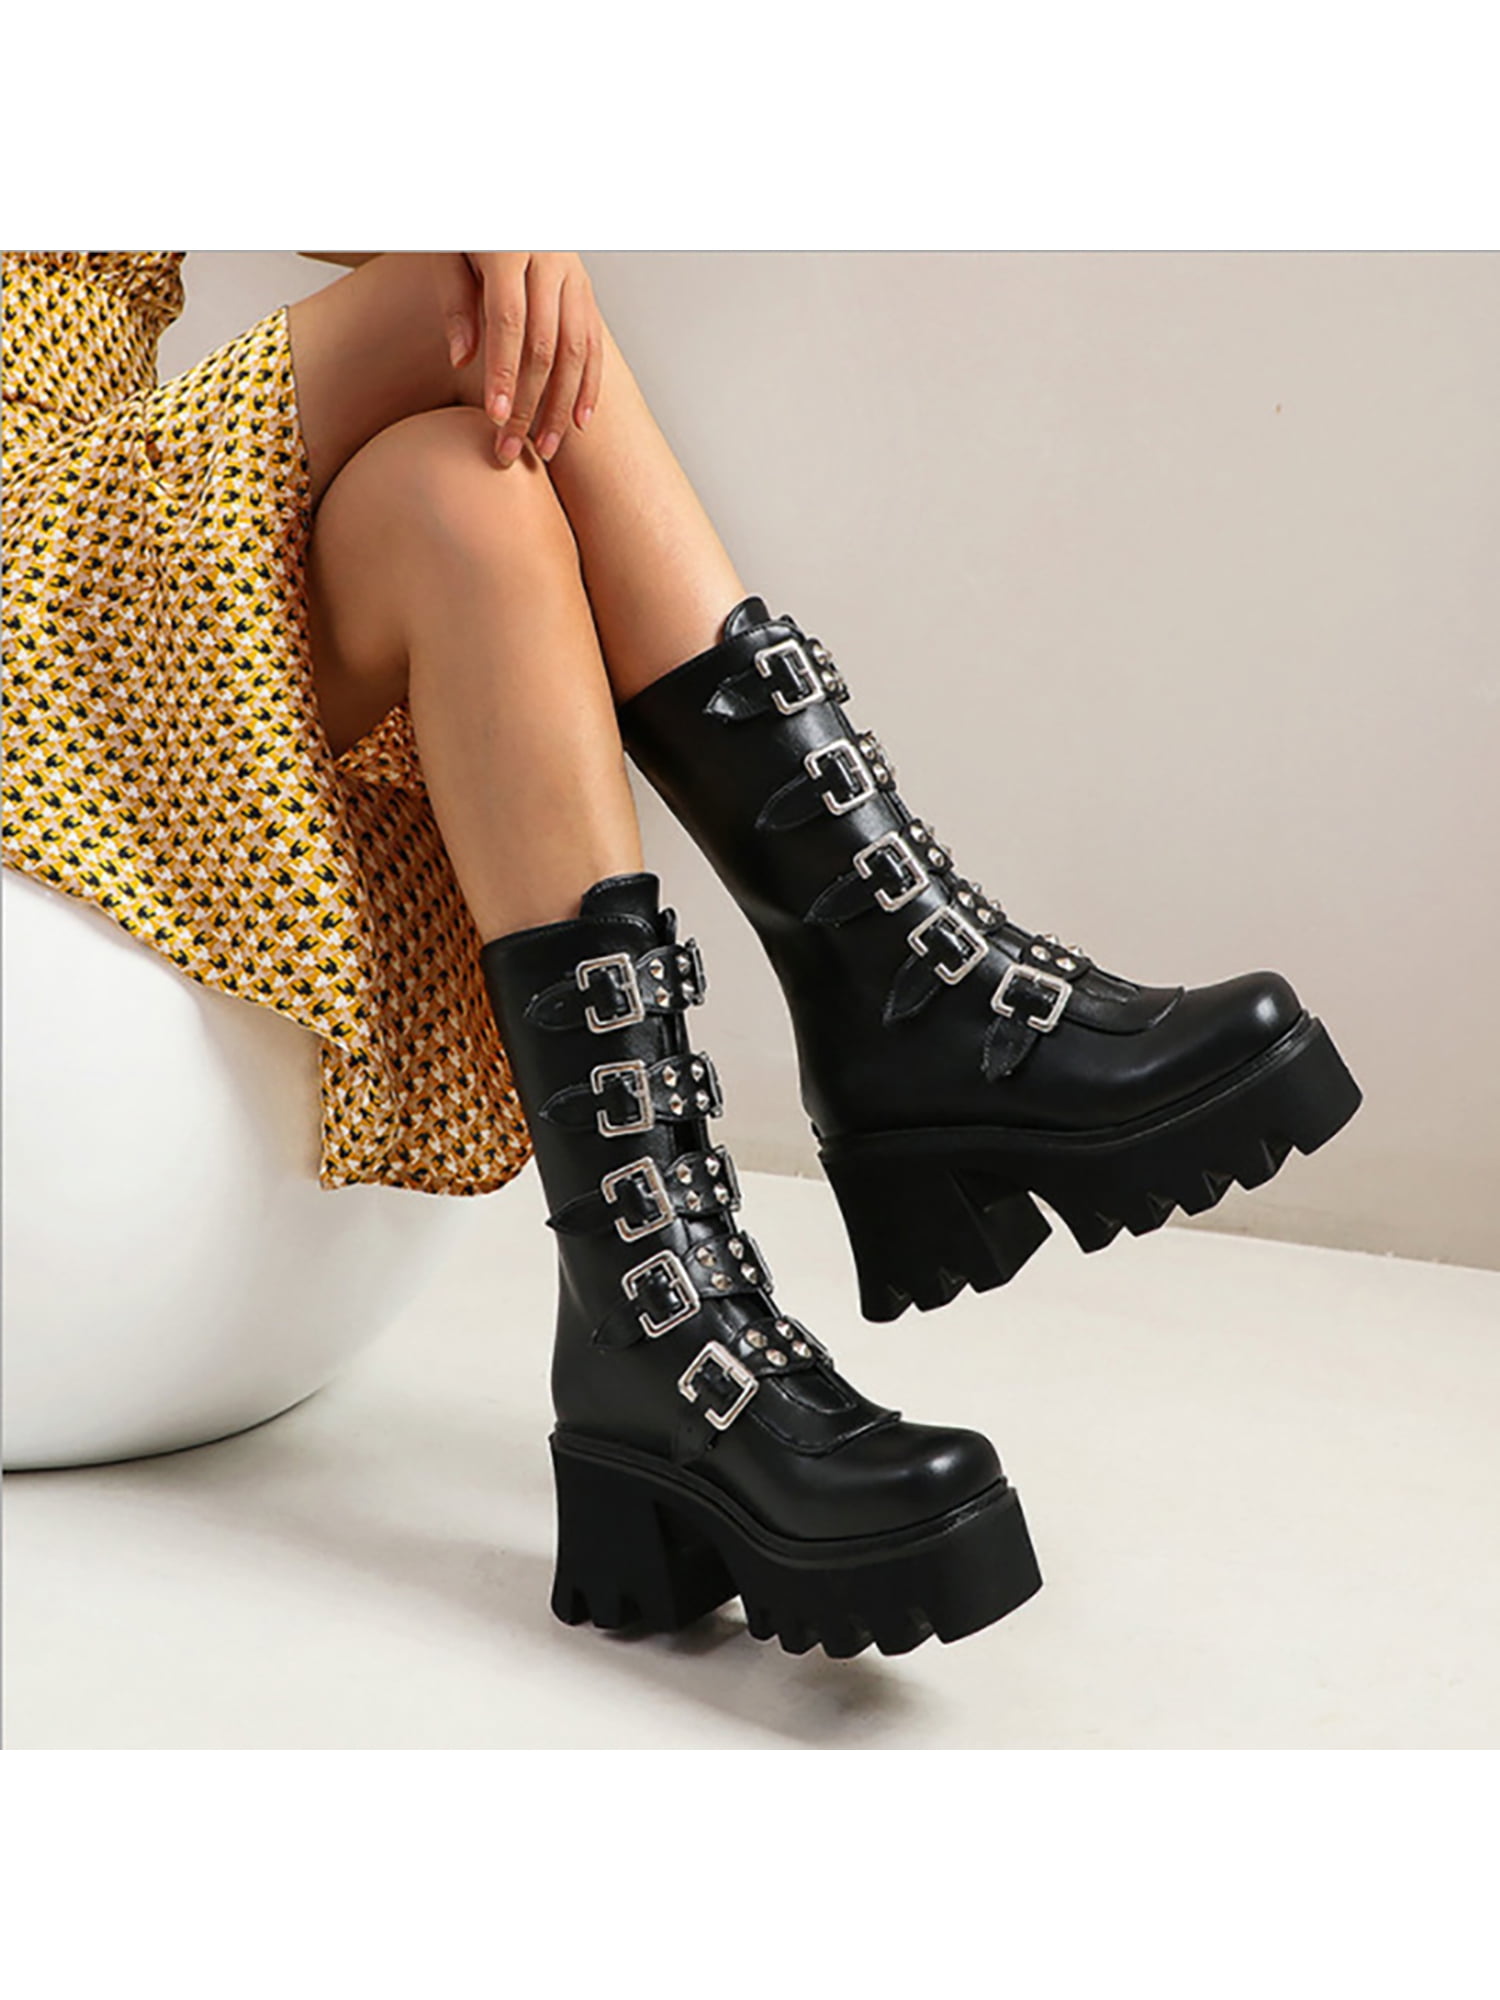 Women Ankle Short Boots Gothic Punk Chunky Platform Wedge Heel Zip Lace Up Shoes 